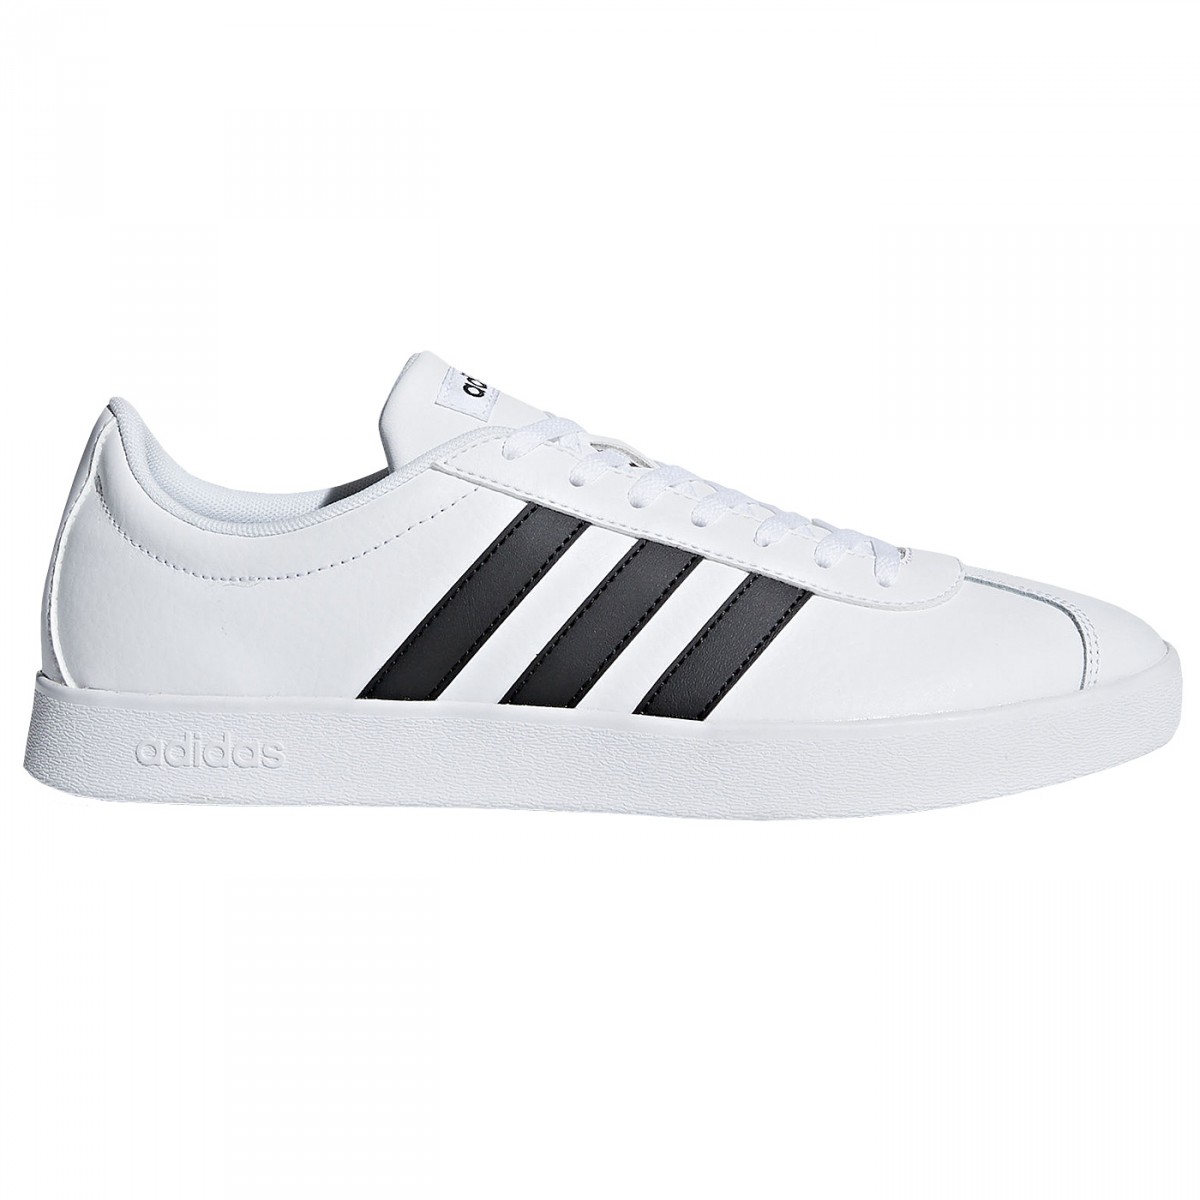 Sneakers Adidas VL Court 2.0 Man - Fashion shoes